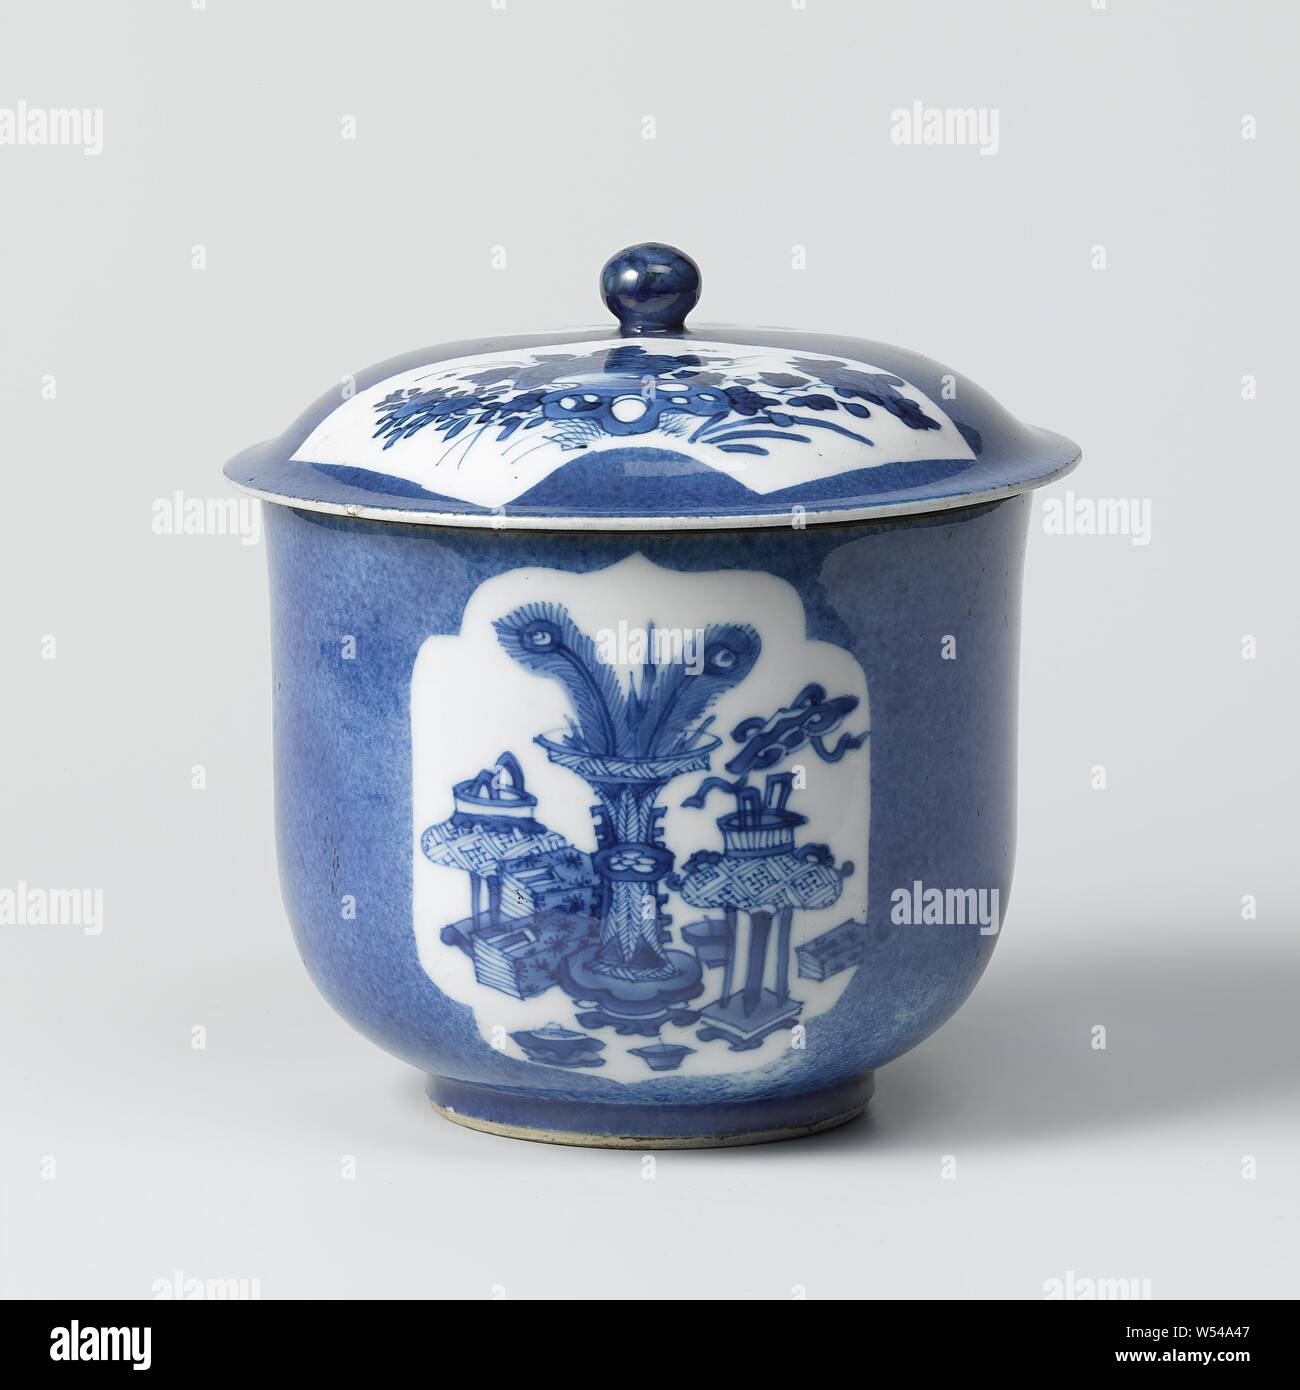 Lid or covered jar, On the lid two recessed, fan-shaped boxes with flowering plants near a rock. Blue poudré with blue and white., anonymous, China, c. 1700 - c. 1720, Qing-dynasty (1644-1912) / Kangxi-period (1662-1722), porcelain (material), glaze, cobalt (mineral), vitrification, h 4.5 cm × d 15.7 cm Stock Photo